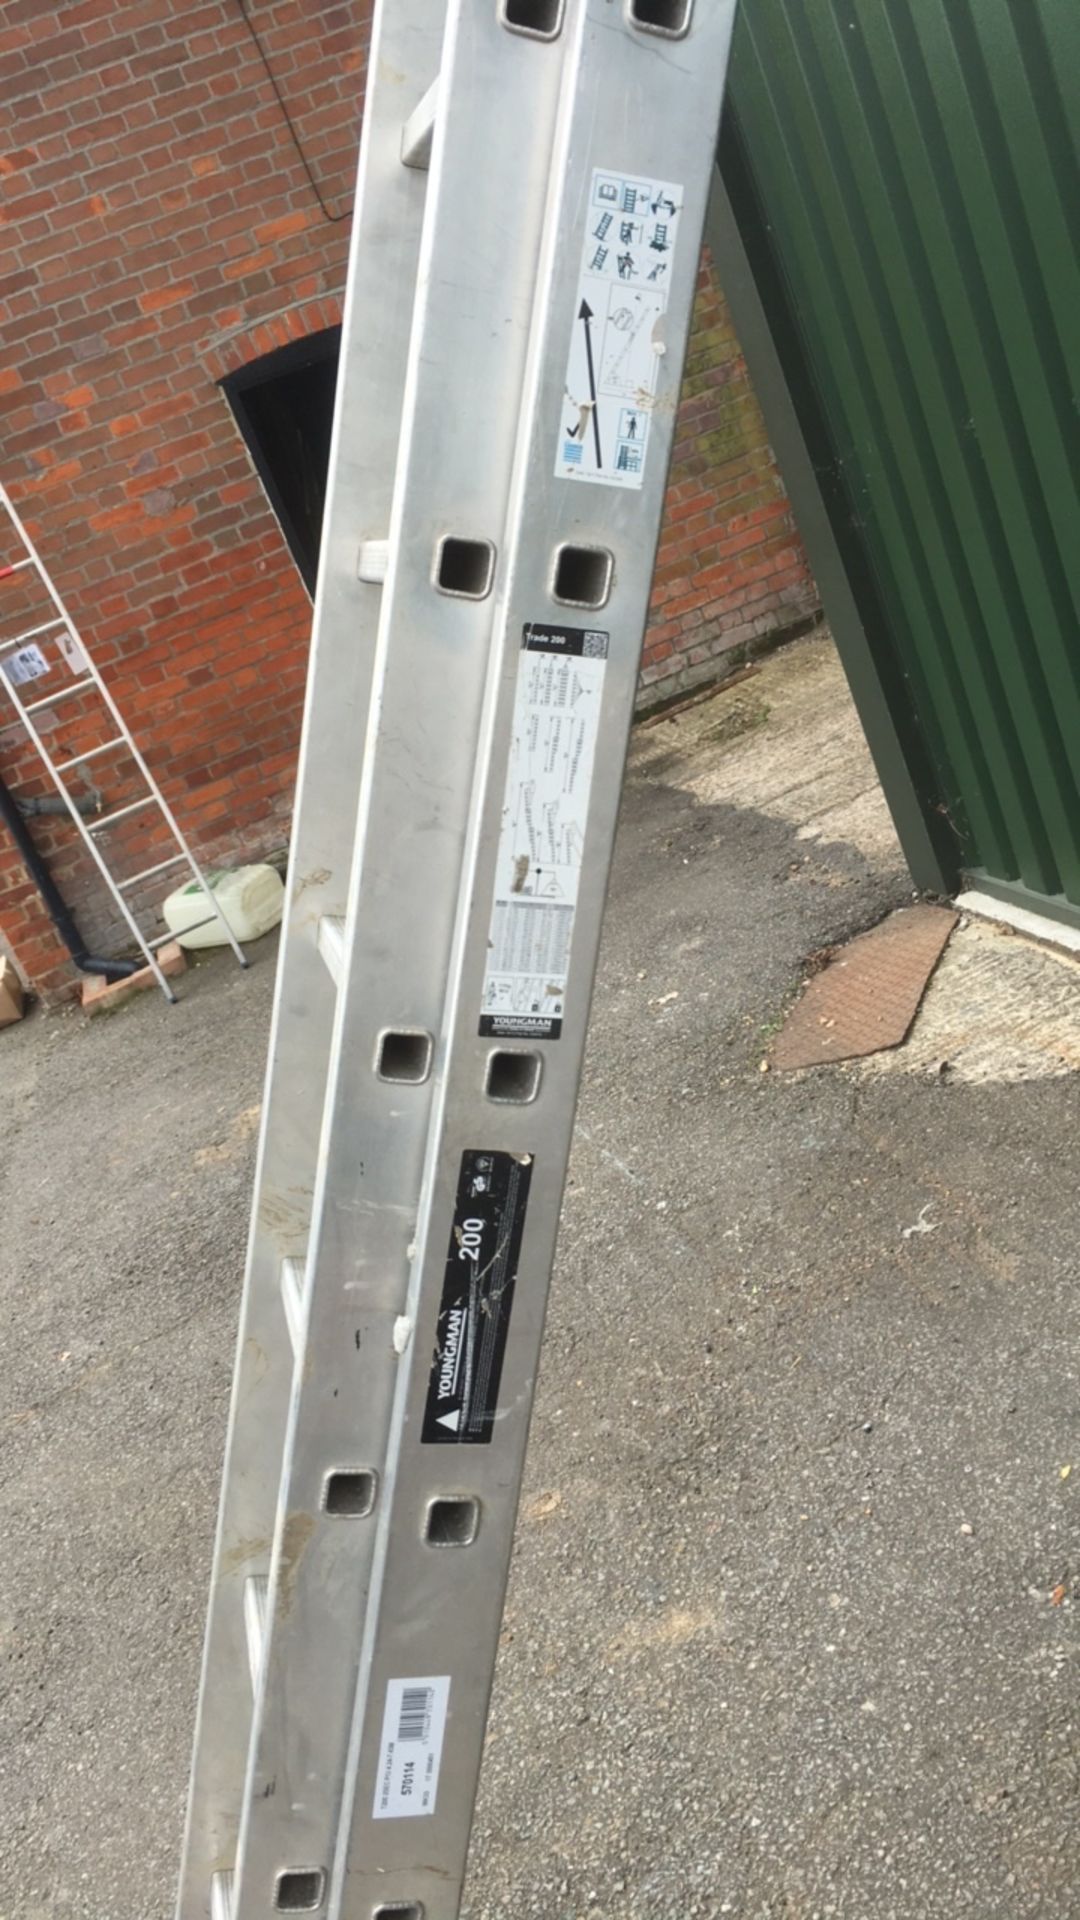 Youngman aluminium ladder 2 section 4.1m - Image 3 of 3